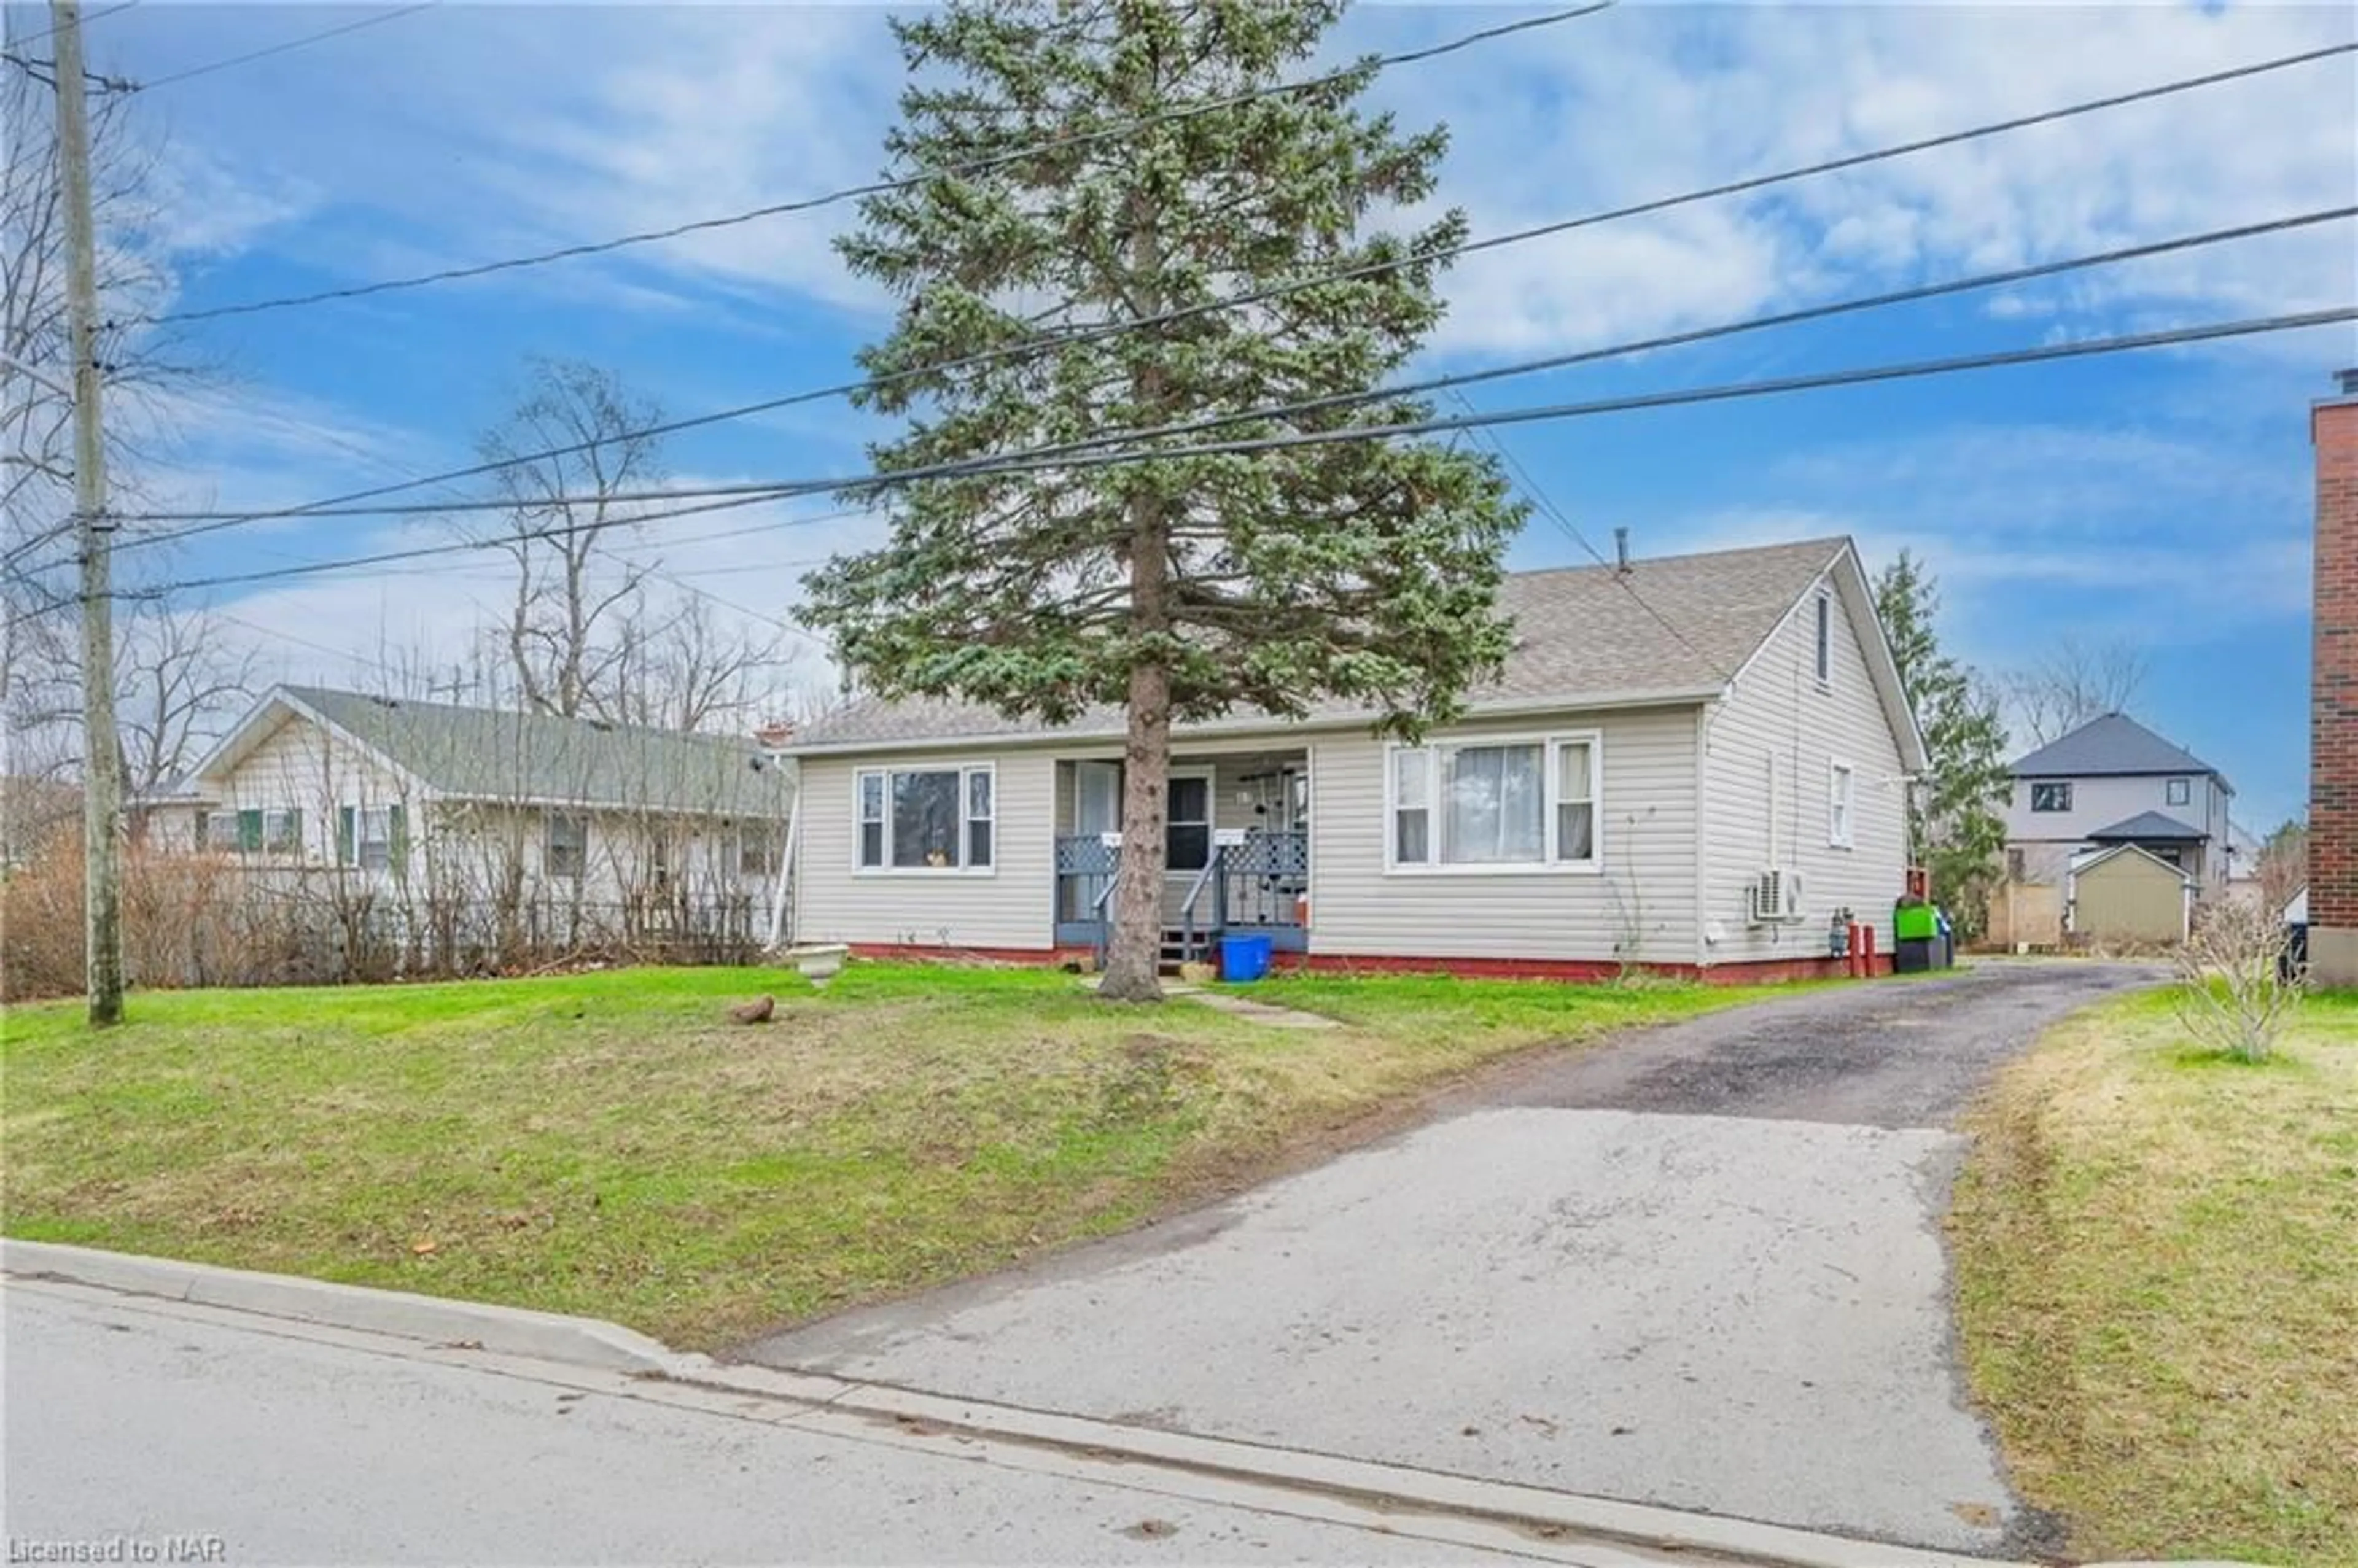 Frontside or backside of a home for 37 Catherine St, Fort Erie Ontario L2A 2G8